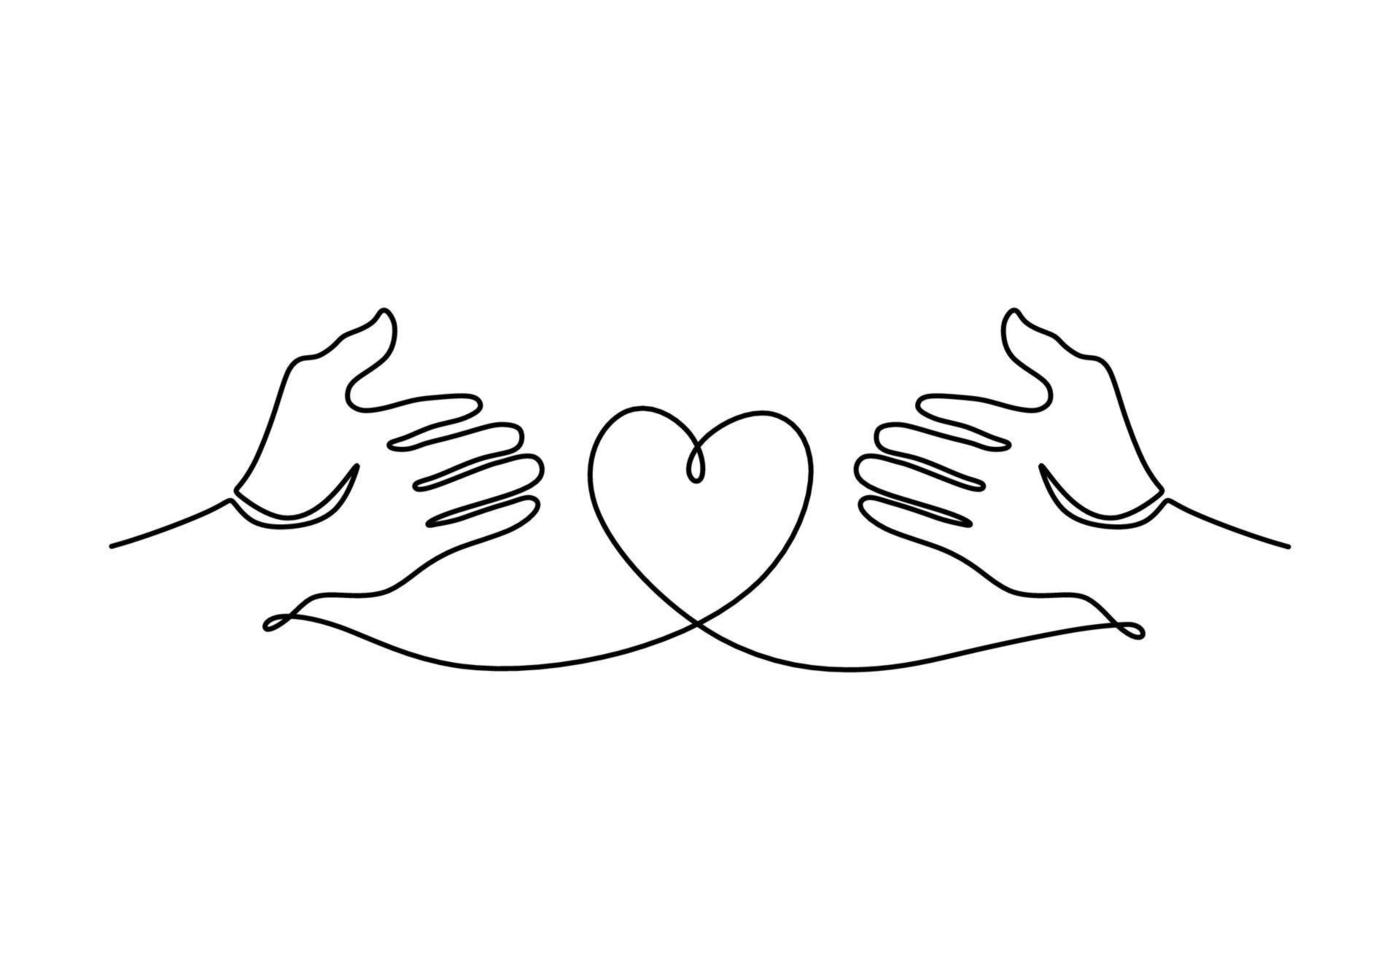 Continuous single line drawing of two opened hands with heart shaped vector